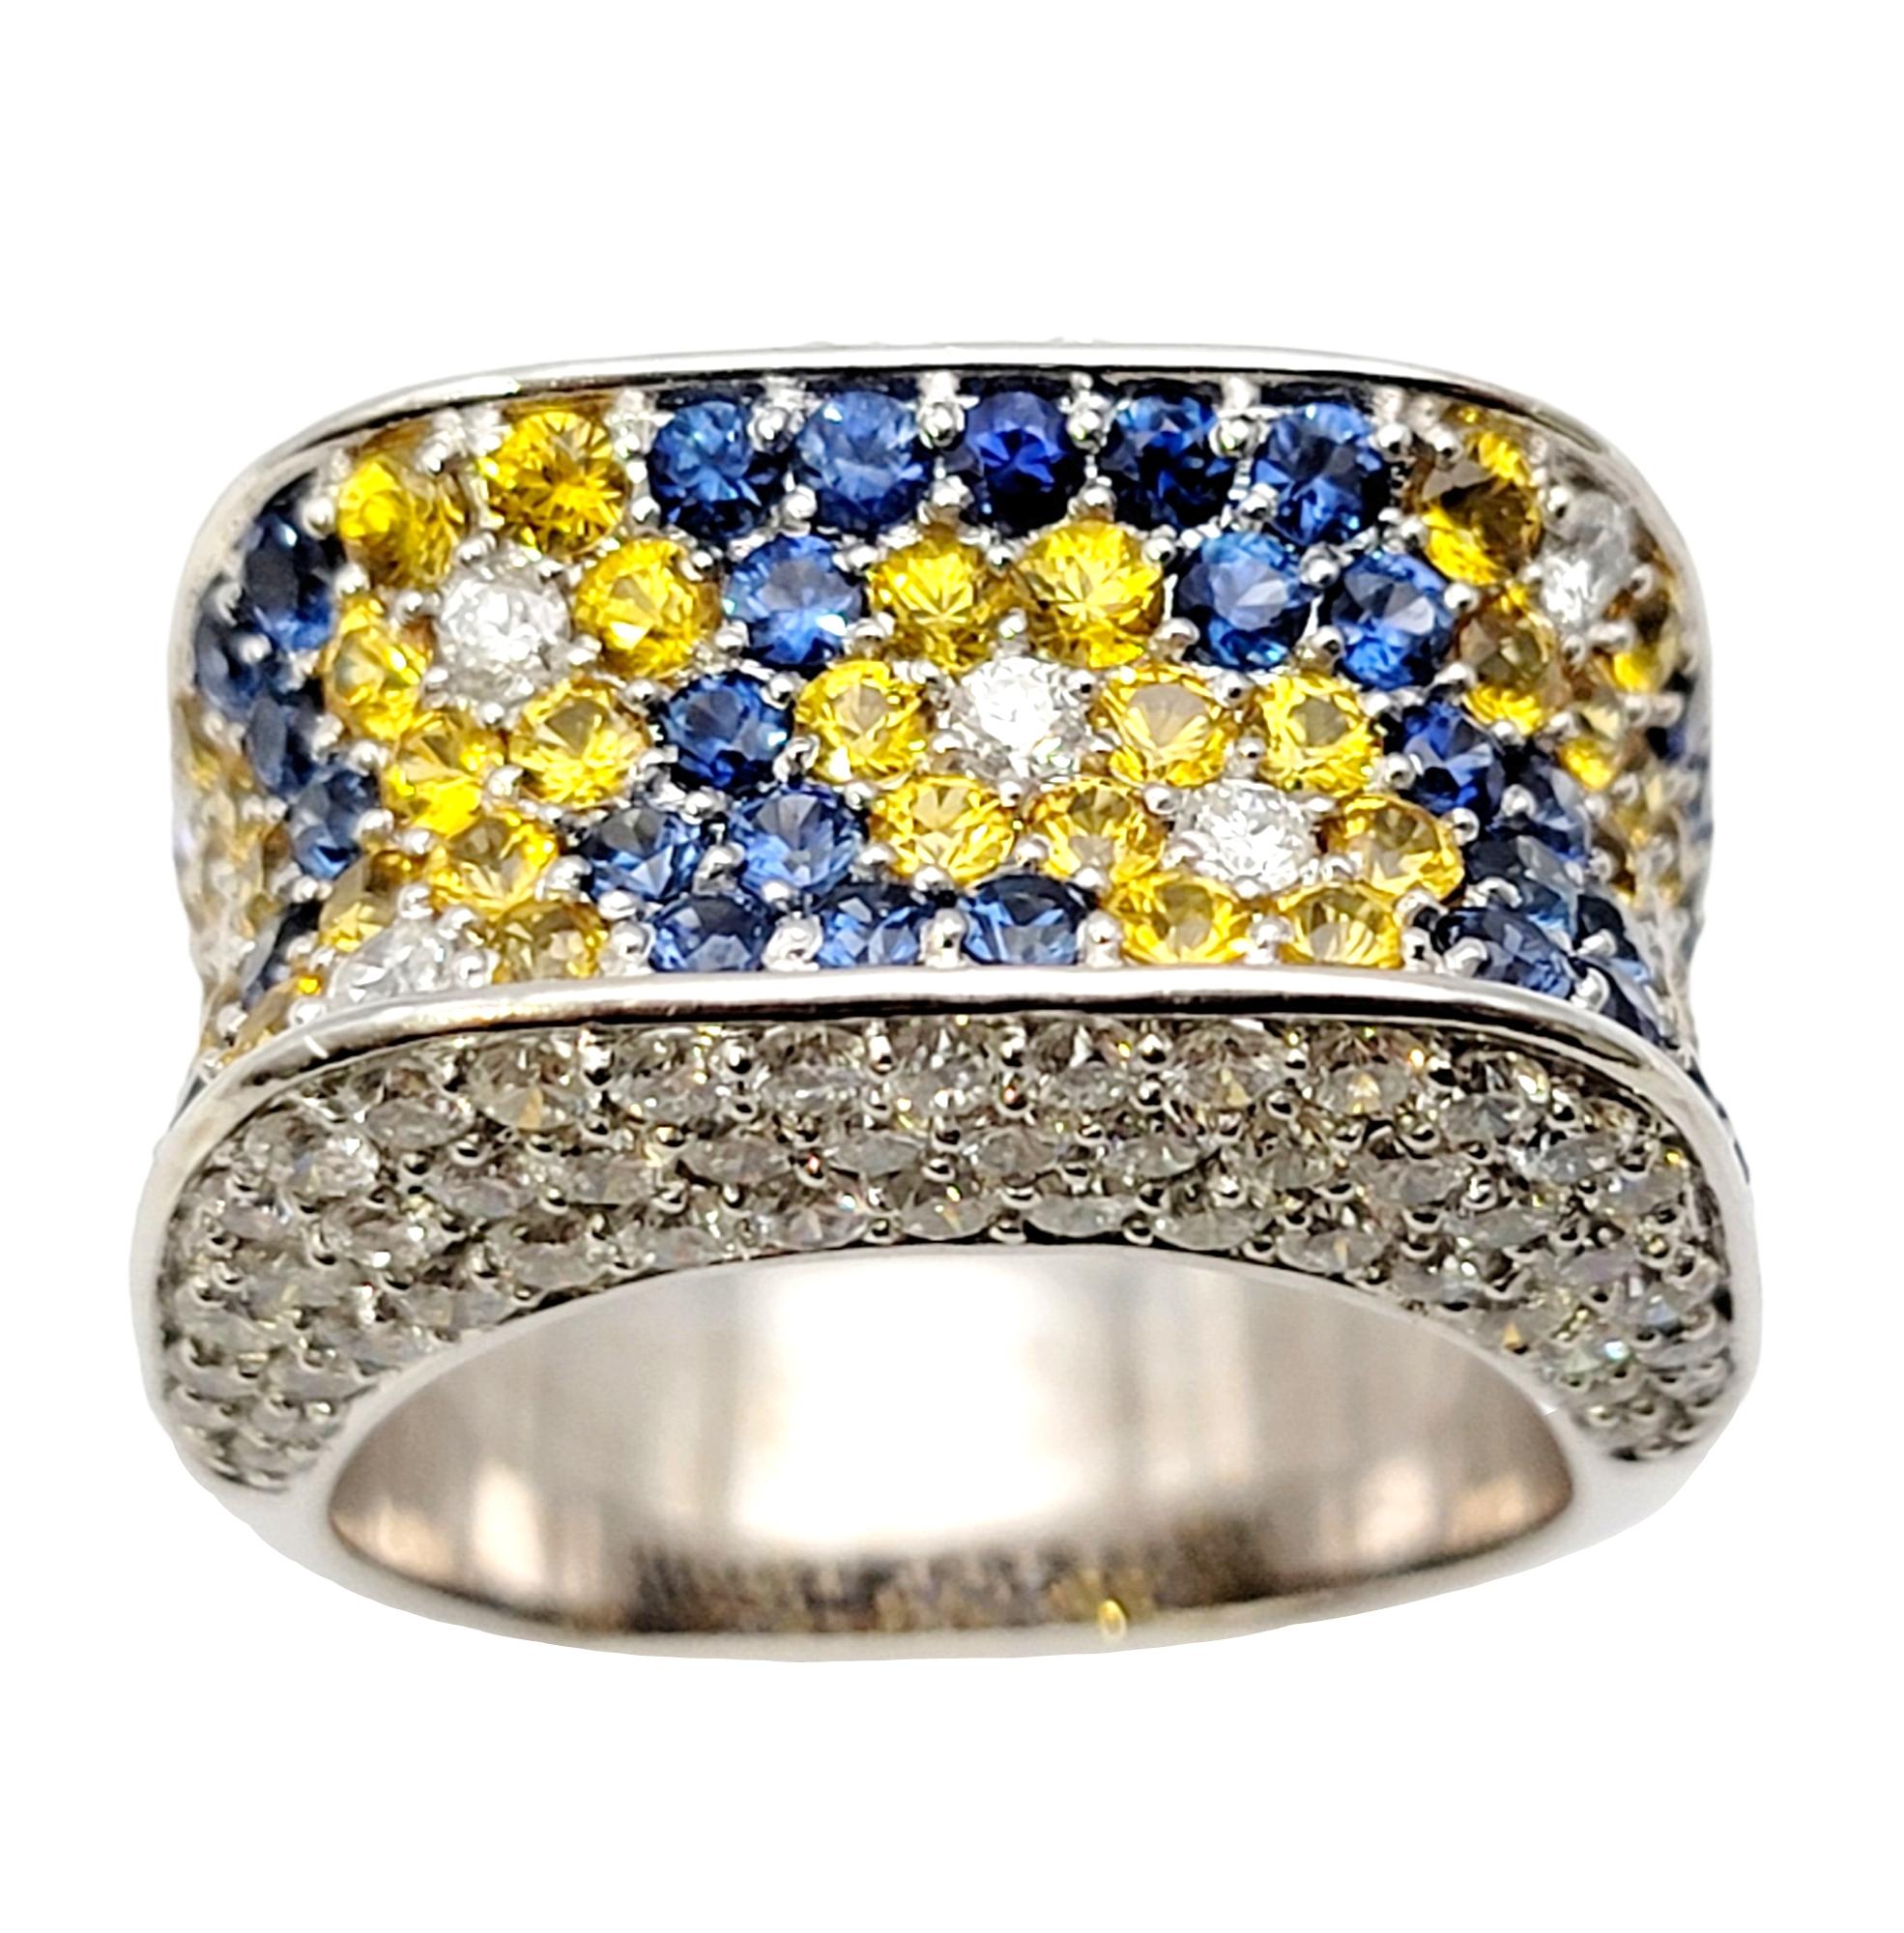 Ring size: 8.75

Super sparkly multi-color sapphire and diamond saddle band ring will fill your finger with joy! This bright, cheerful piece is bursting with color, personality and design while the dazzling gemstones make it truly glow on the